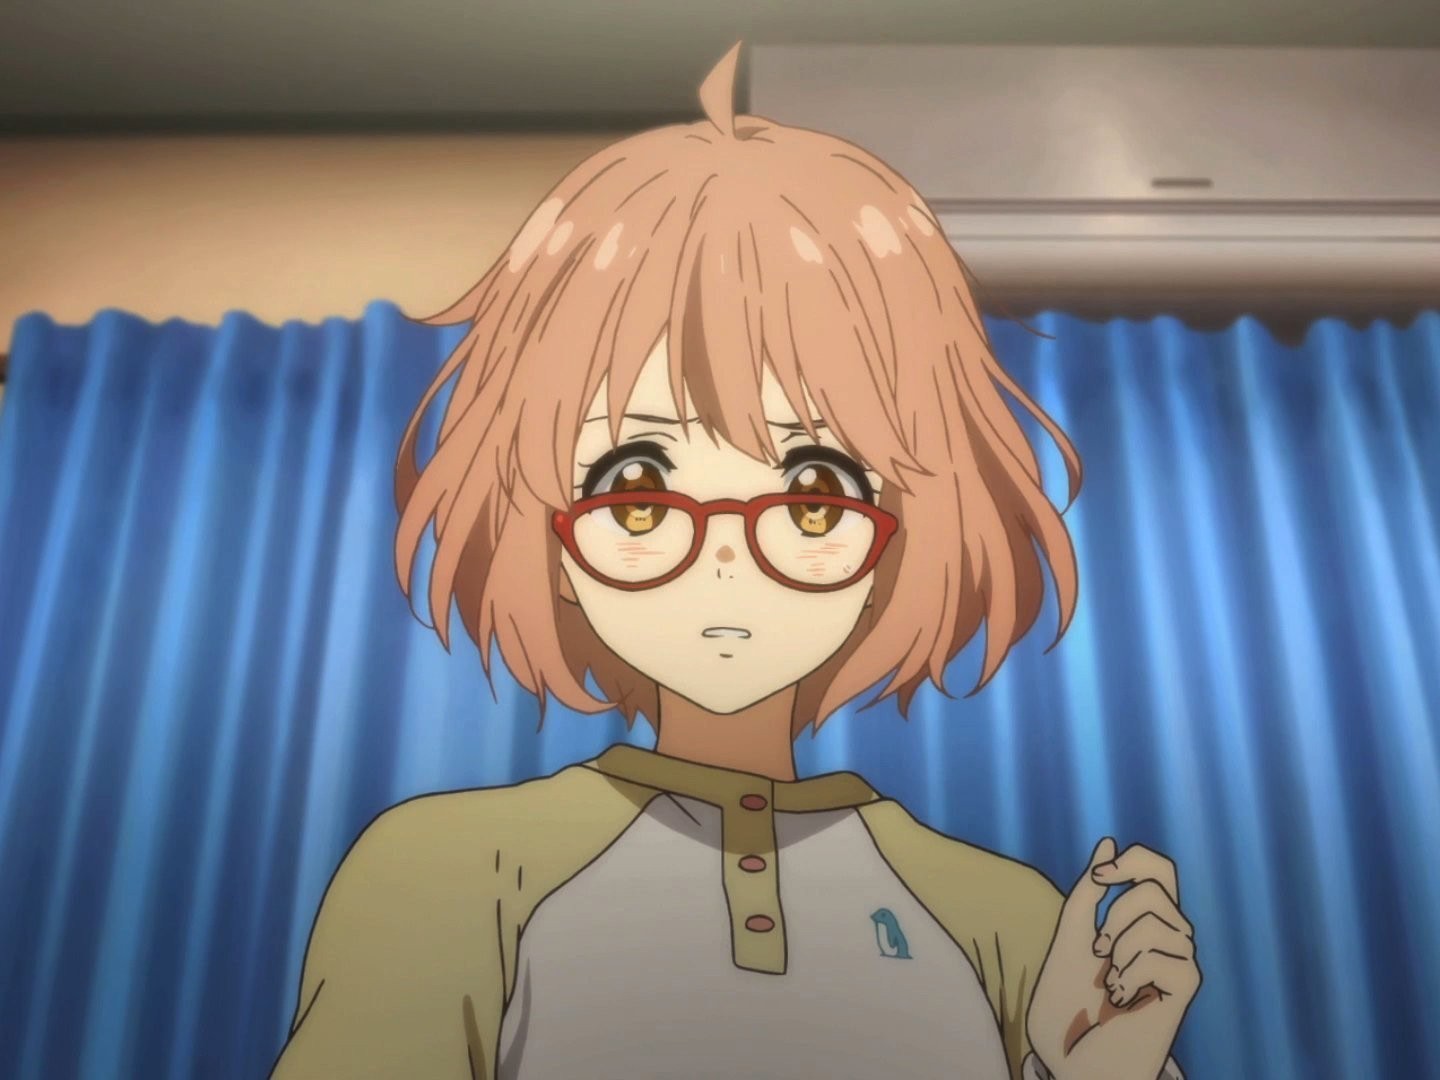 Beyond the Boundary Movie: I'll Be Here -- Kako-hen - Rotten Tomatoes